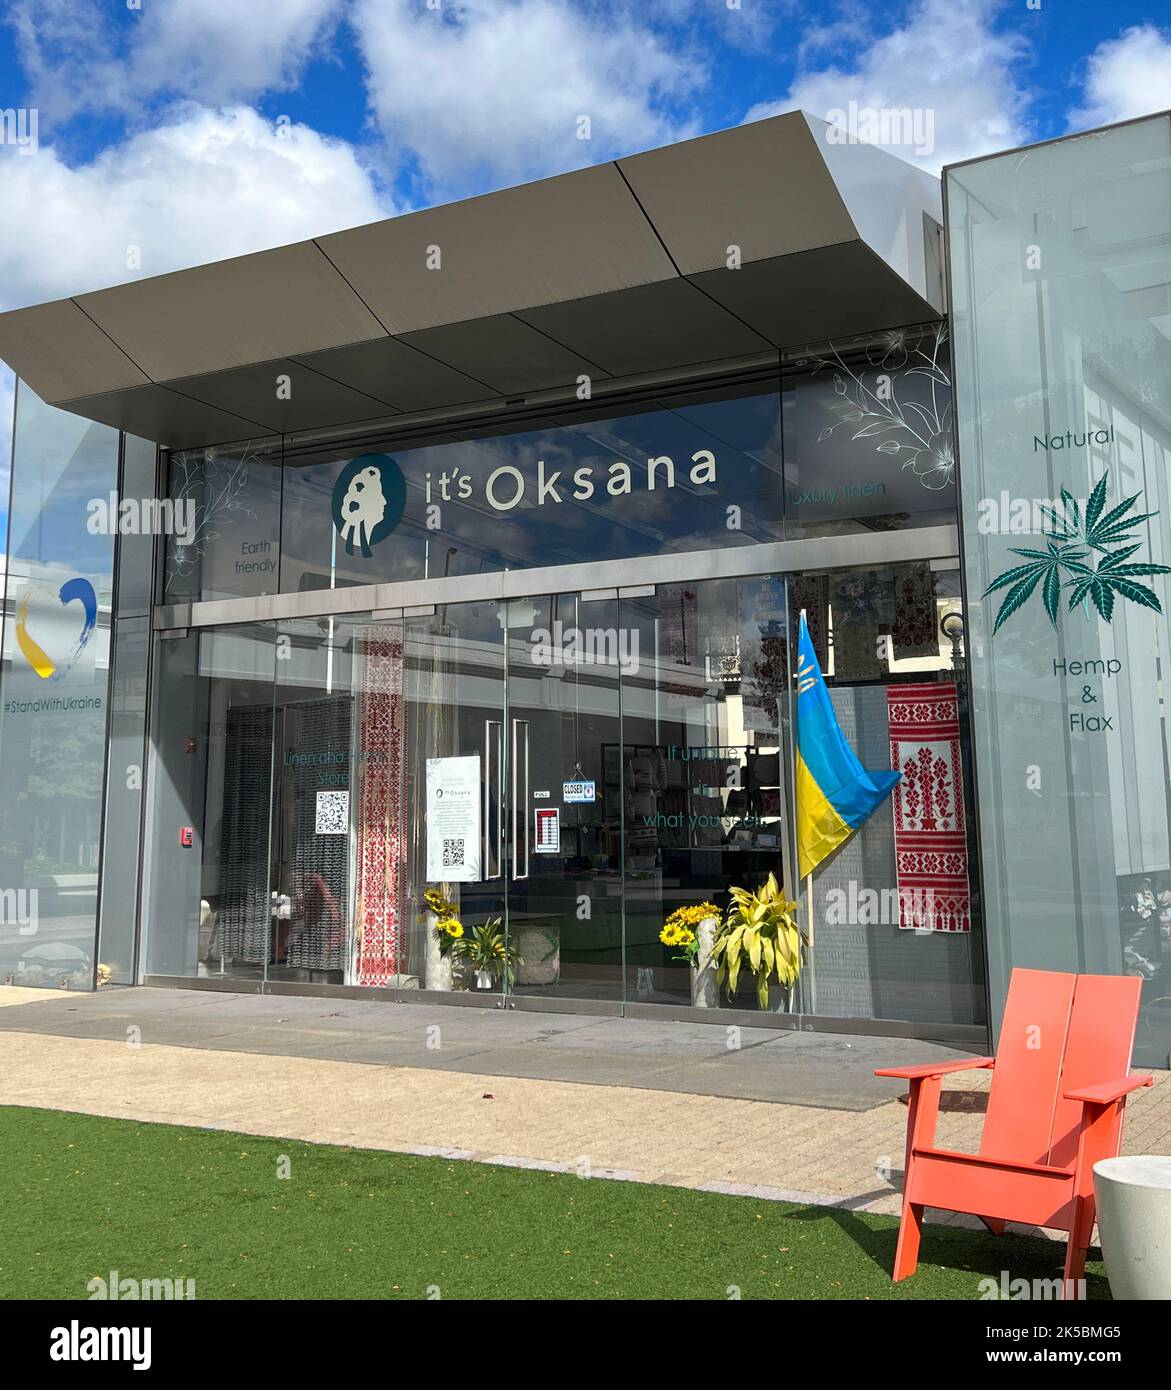 It's Oksana store at Old Orchard Shopping Center Illinois. It's Oksana is a family-owned business with items produced by Ukrainian designers. Stock Photo